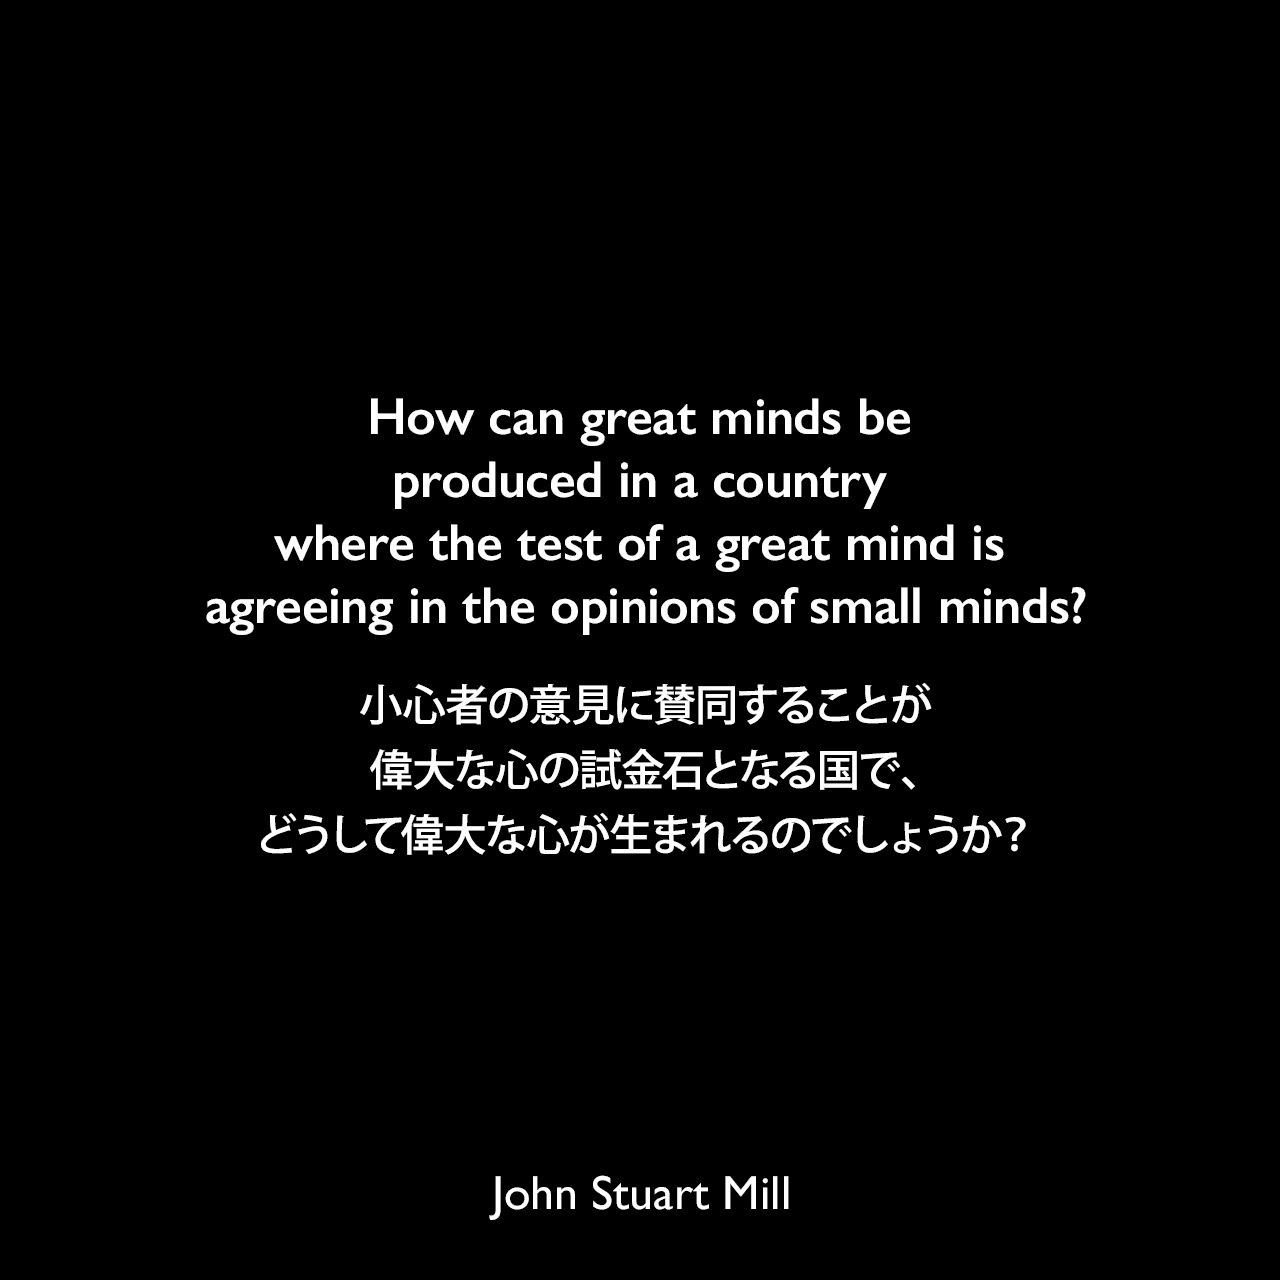 How can great minds be produced in a country where the test of a great mind is agreeing in the opinions of small minds?小心者の意見に賛同することが偉大な心の試金石となる国で、どうして偉大な心が生まれるのでしょうか？- ジェームズ・ハネッカーによる本「Egoists, a Book of Supermen」よりJohn Stuart Mill